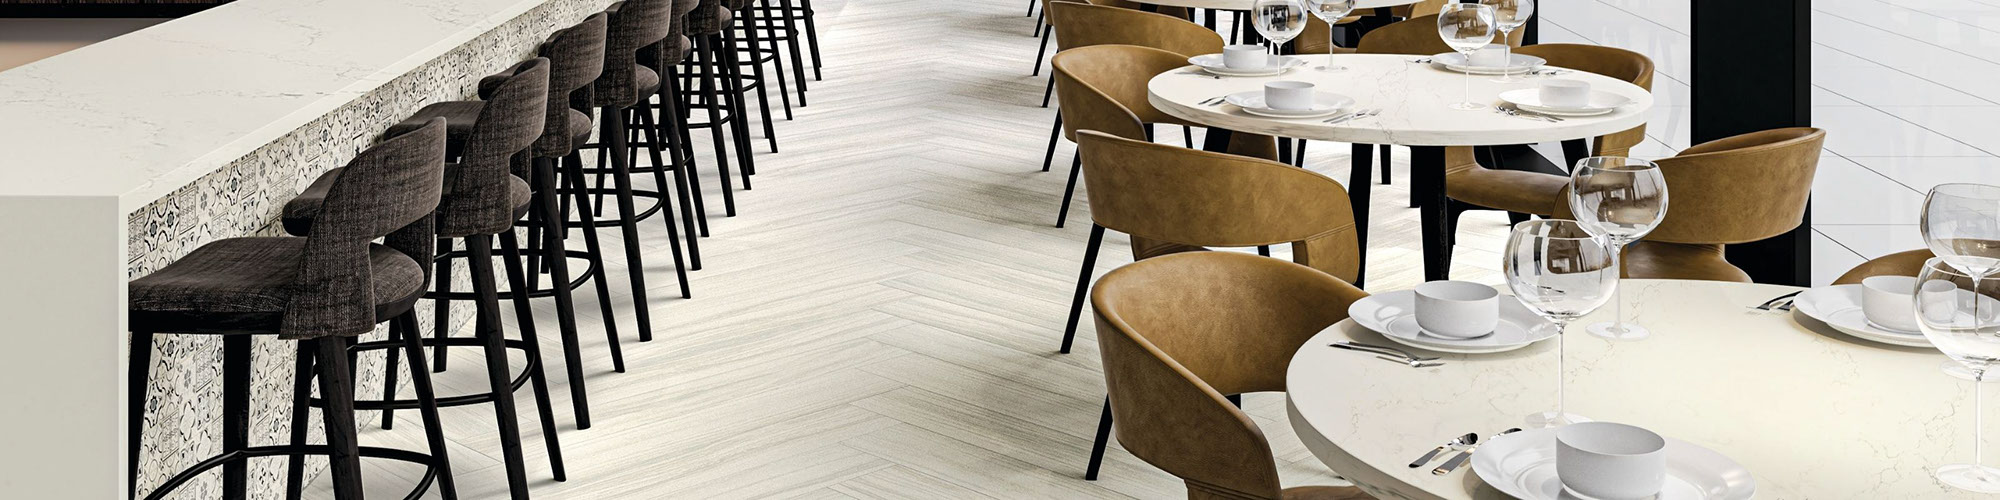 Restaurant with off-white stone look floor tile in a herringbone pattern, white quartz countertop and white & black encaustic, tables & chairs.